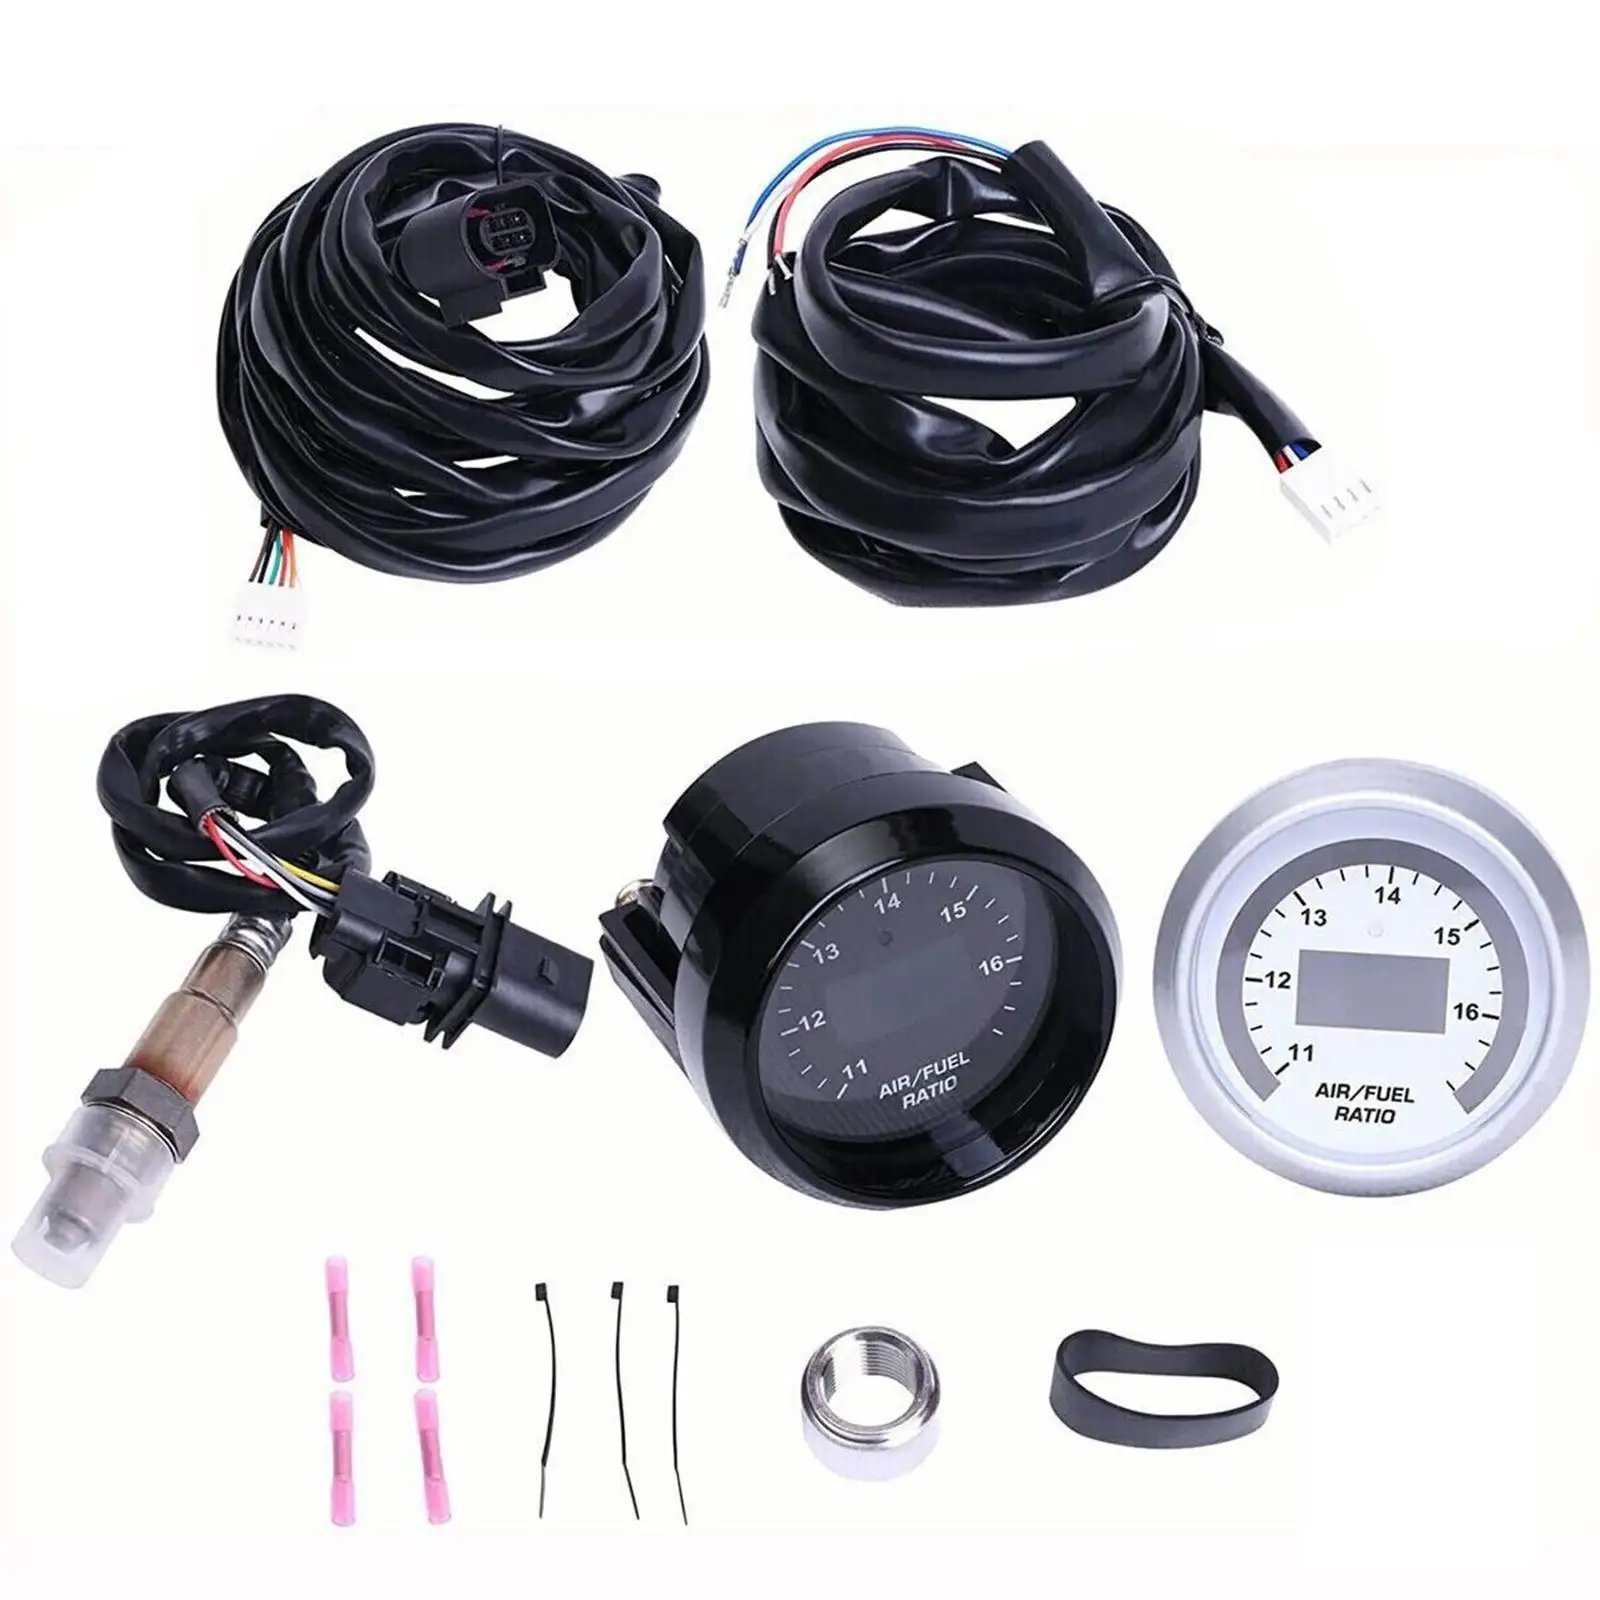 30-4110 Easy Install Accessories Replacement Uego Air Fuel Ratio Gauge Set